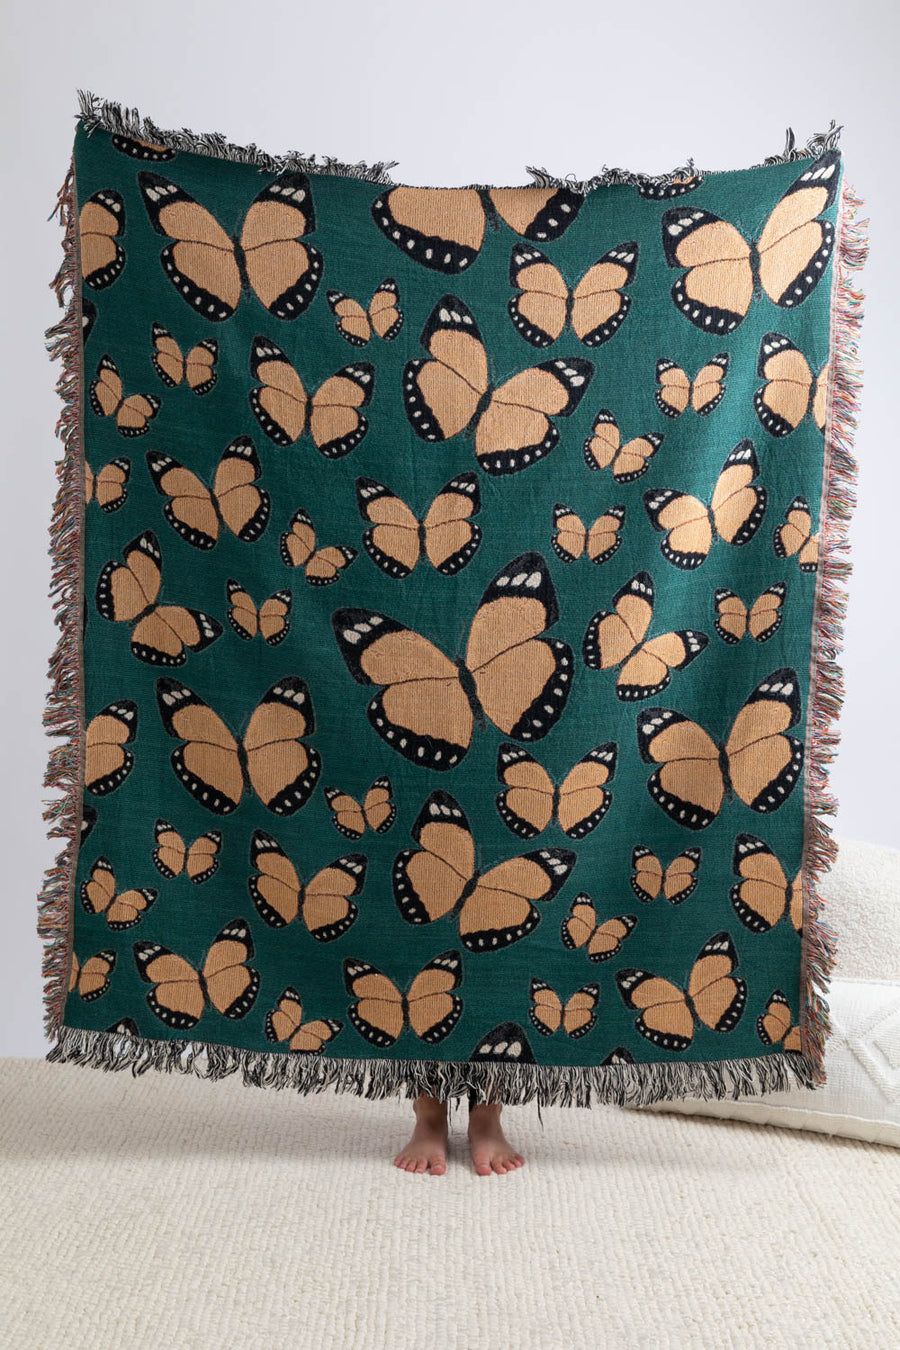 Monarch Butterfly Throw Blanket